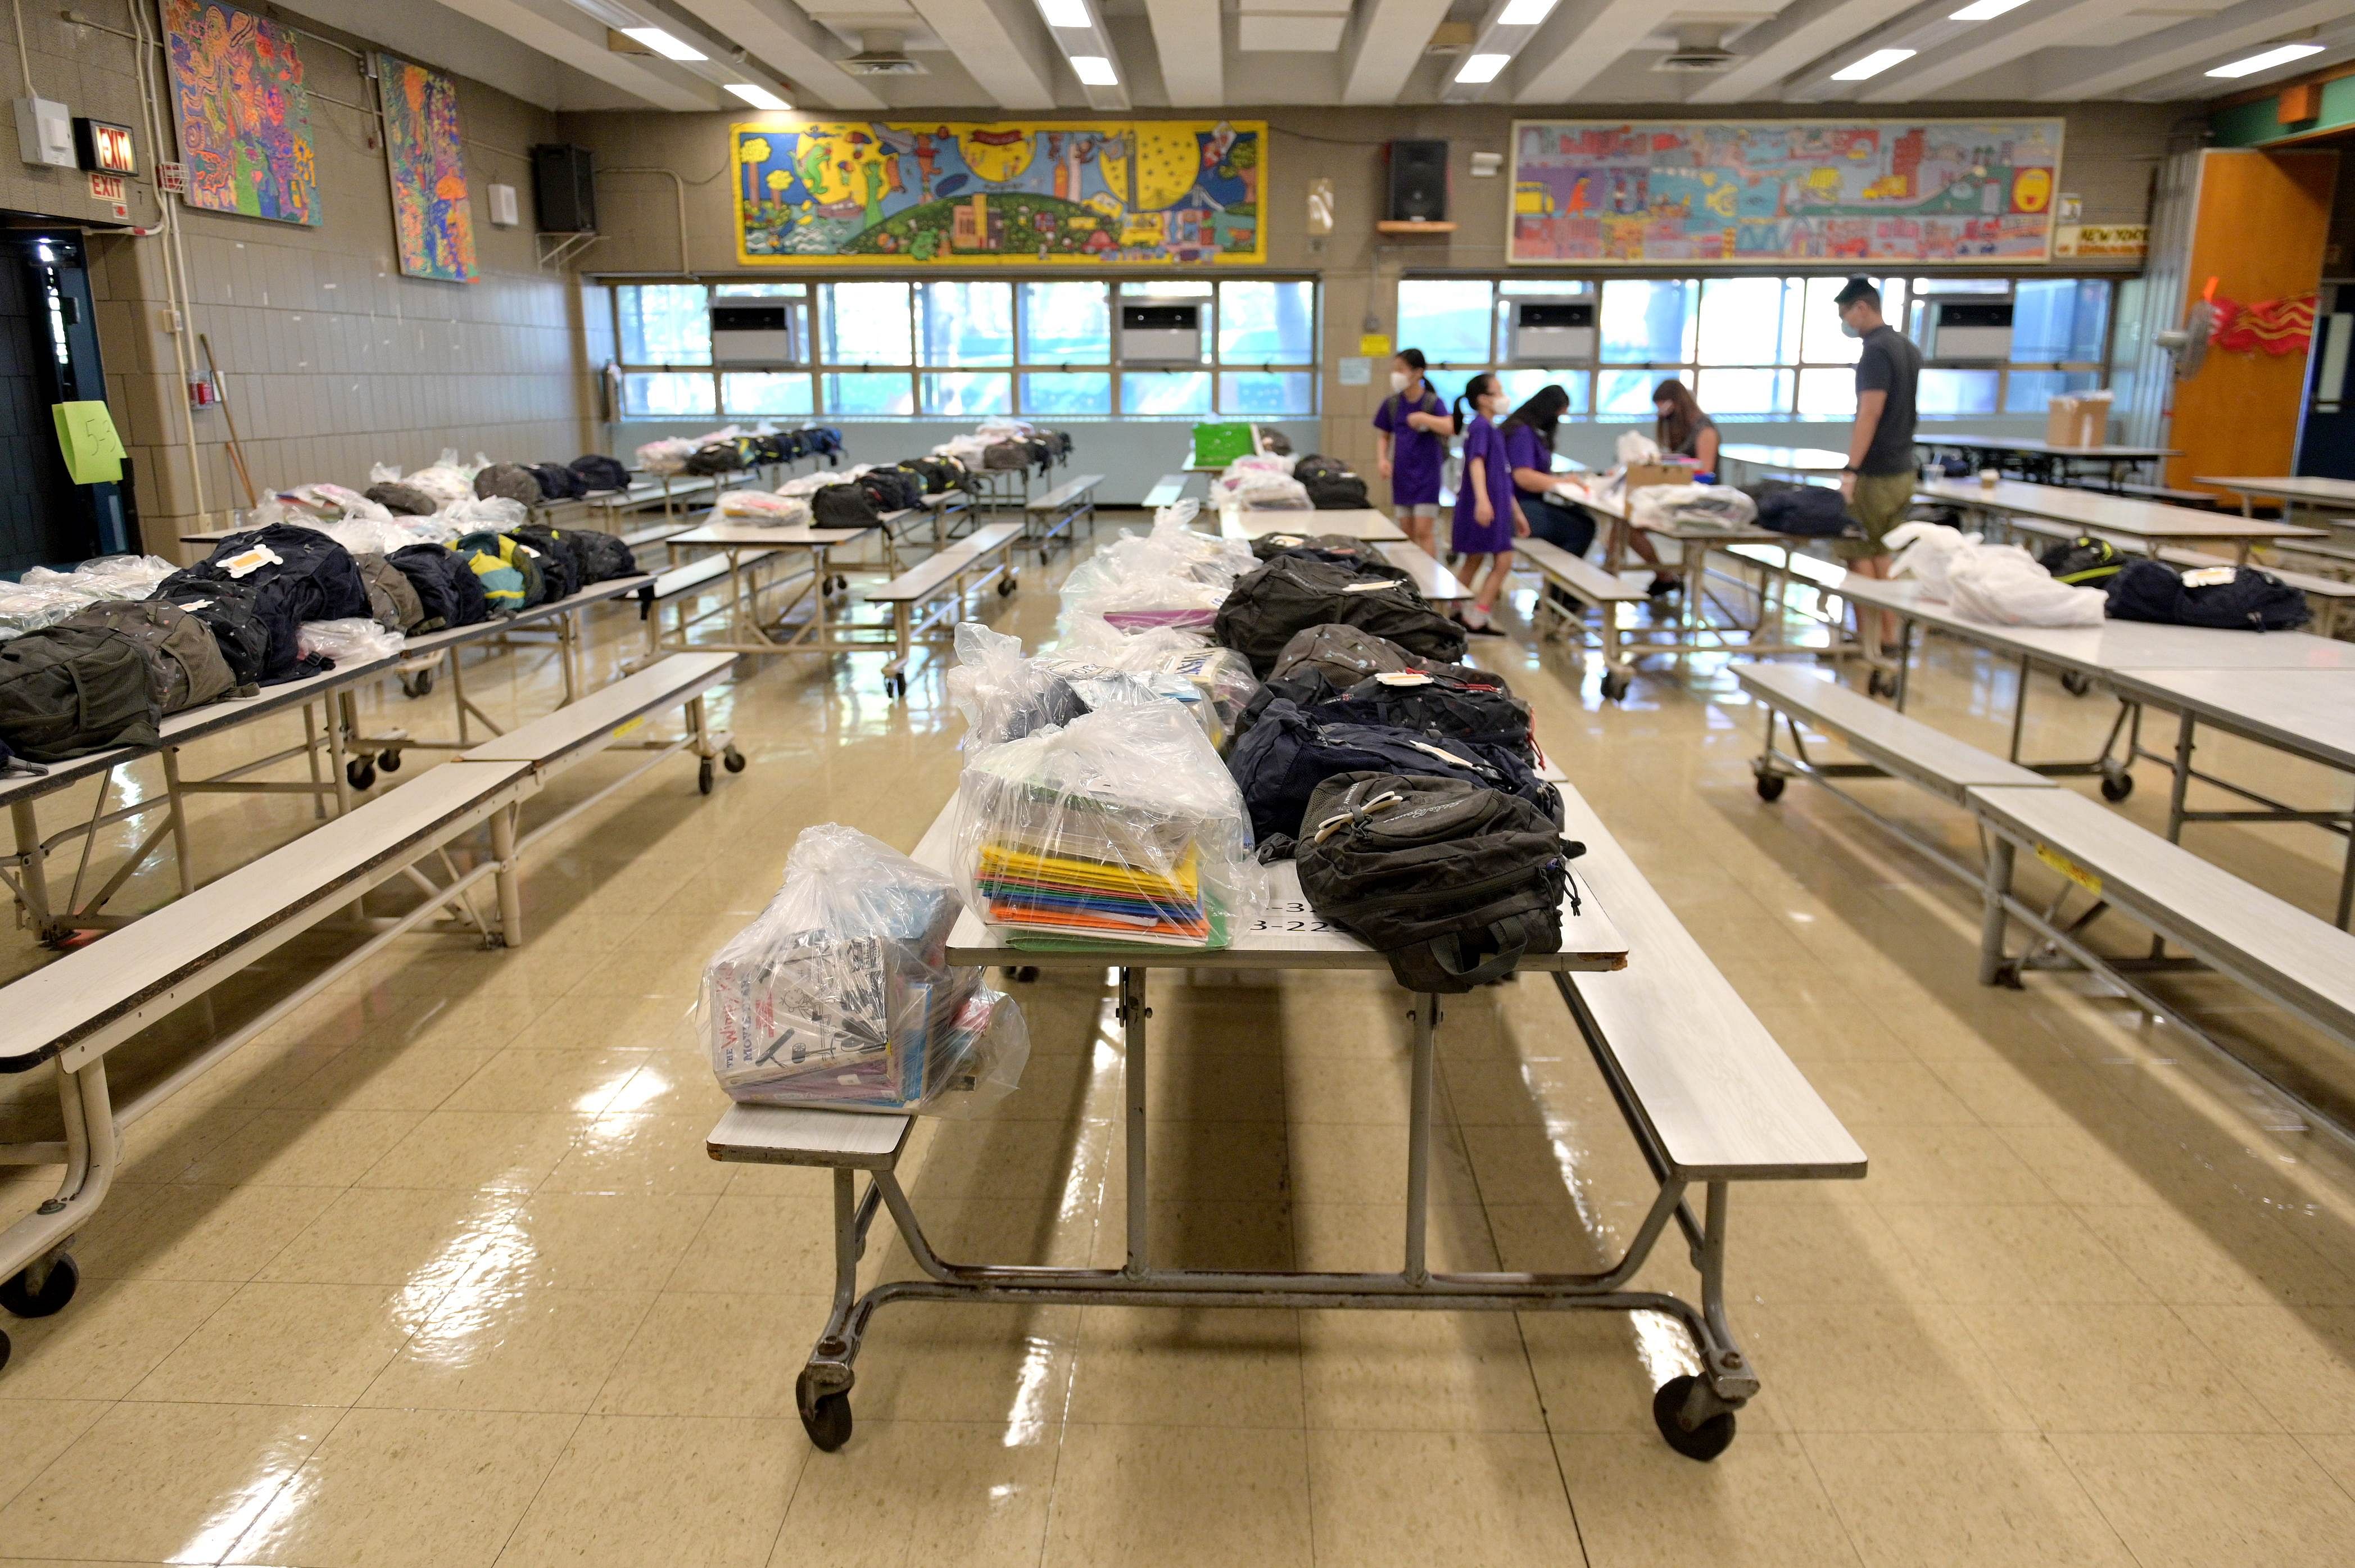 Rows of cafeteria tables are reserved for gifts and personal items left behind before schools were shut down to be picked up by students who just graduated at Yung Wing School P.S. 124 on June 29, 2020 in New York City. In April, it was announced that NYC public schools would be closed at least through the end of the school year amid the spread of coronavirus (COVID-19). Credit: Getty Images/AFP